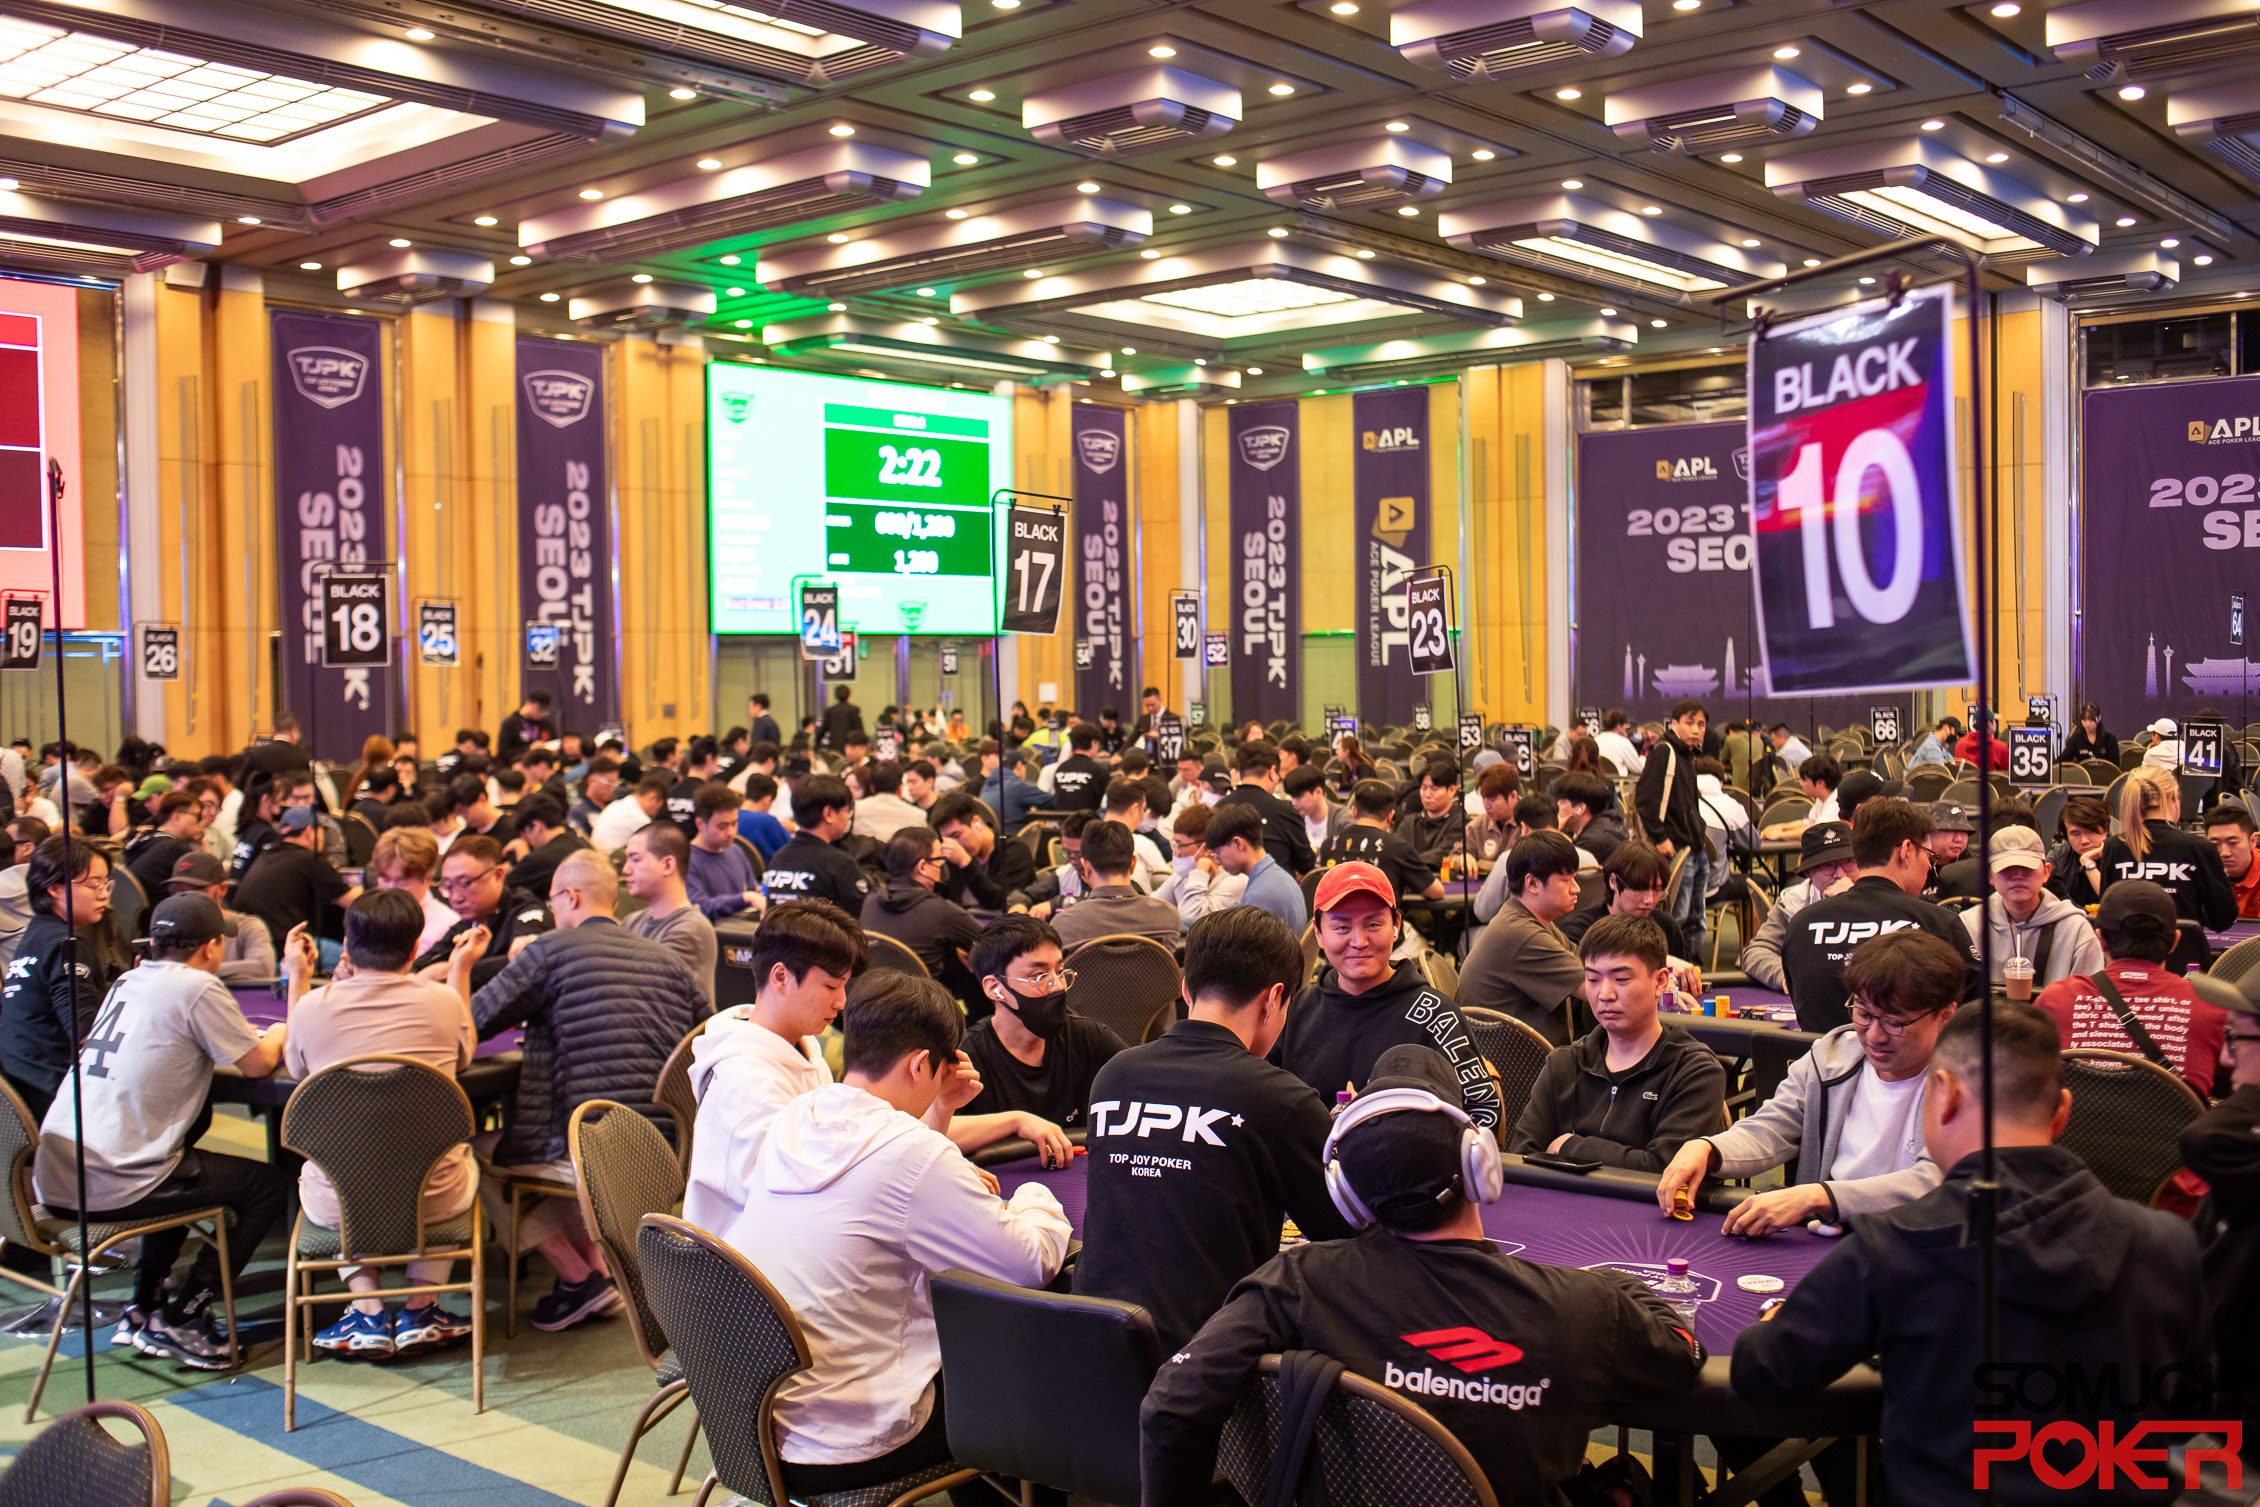 TJPT Korea (TJPK) Main Event:  Hunt for the money and a final 9 spot underway! 113 players return for Day 2; APL Seoul up next!